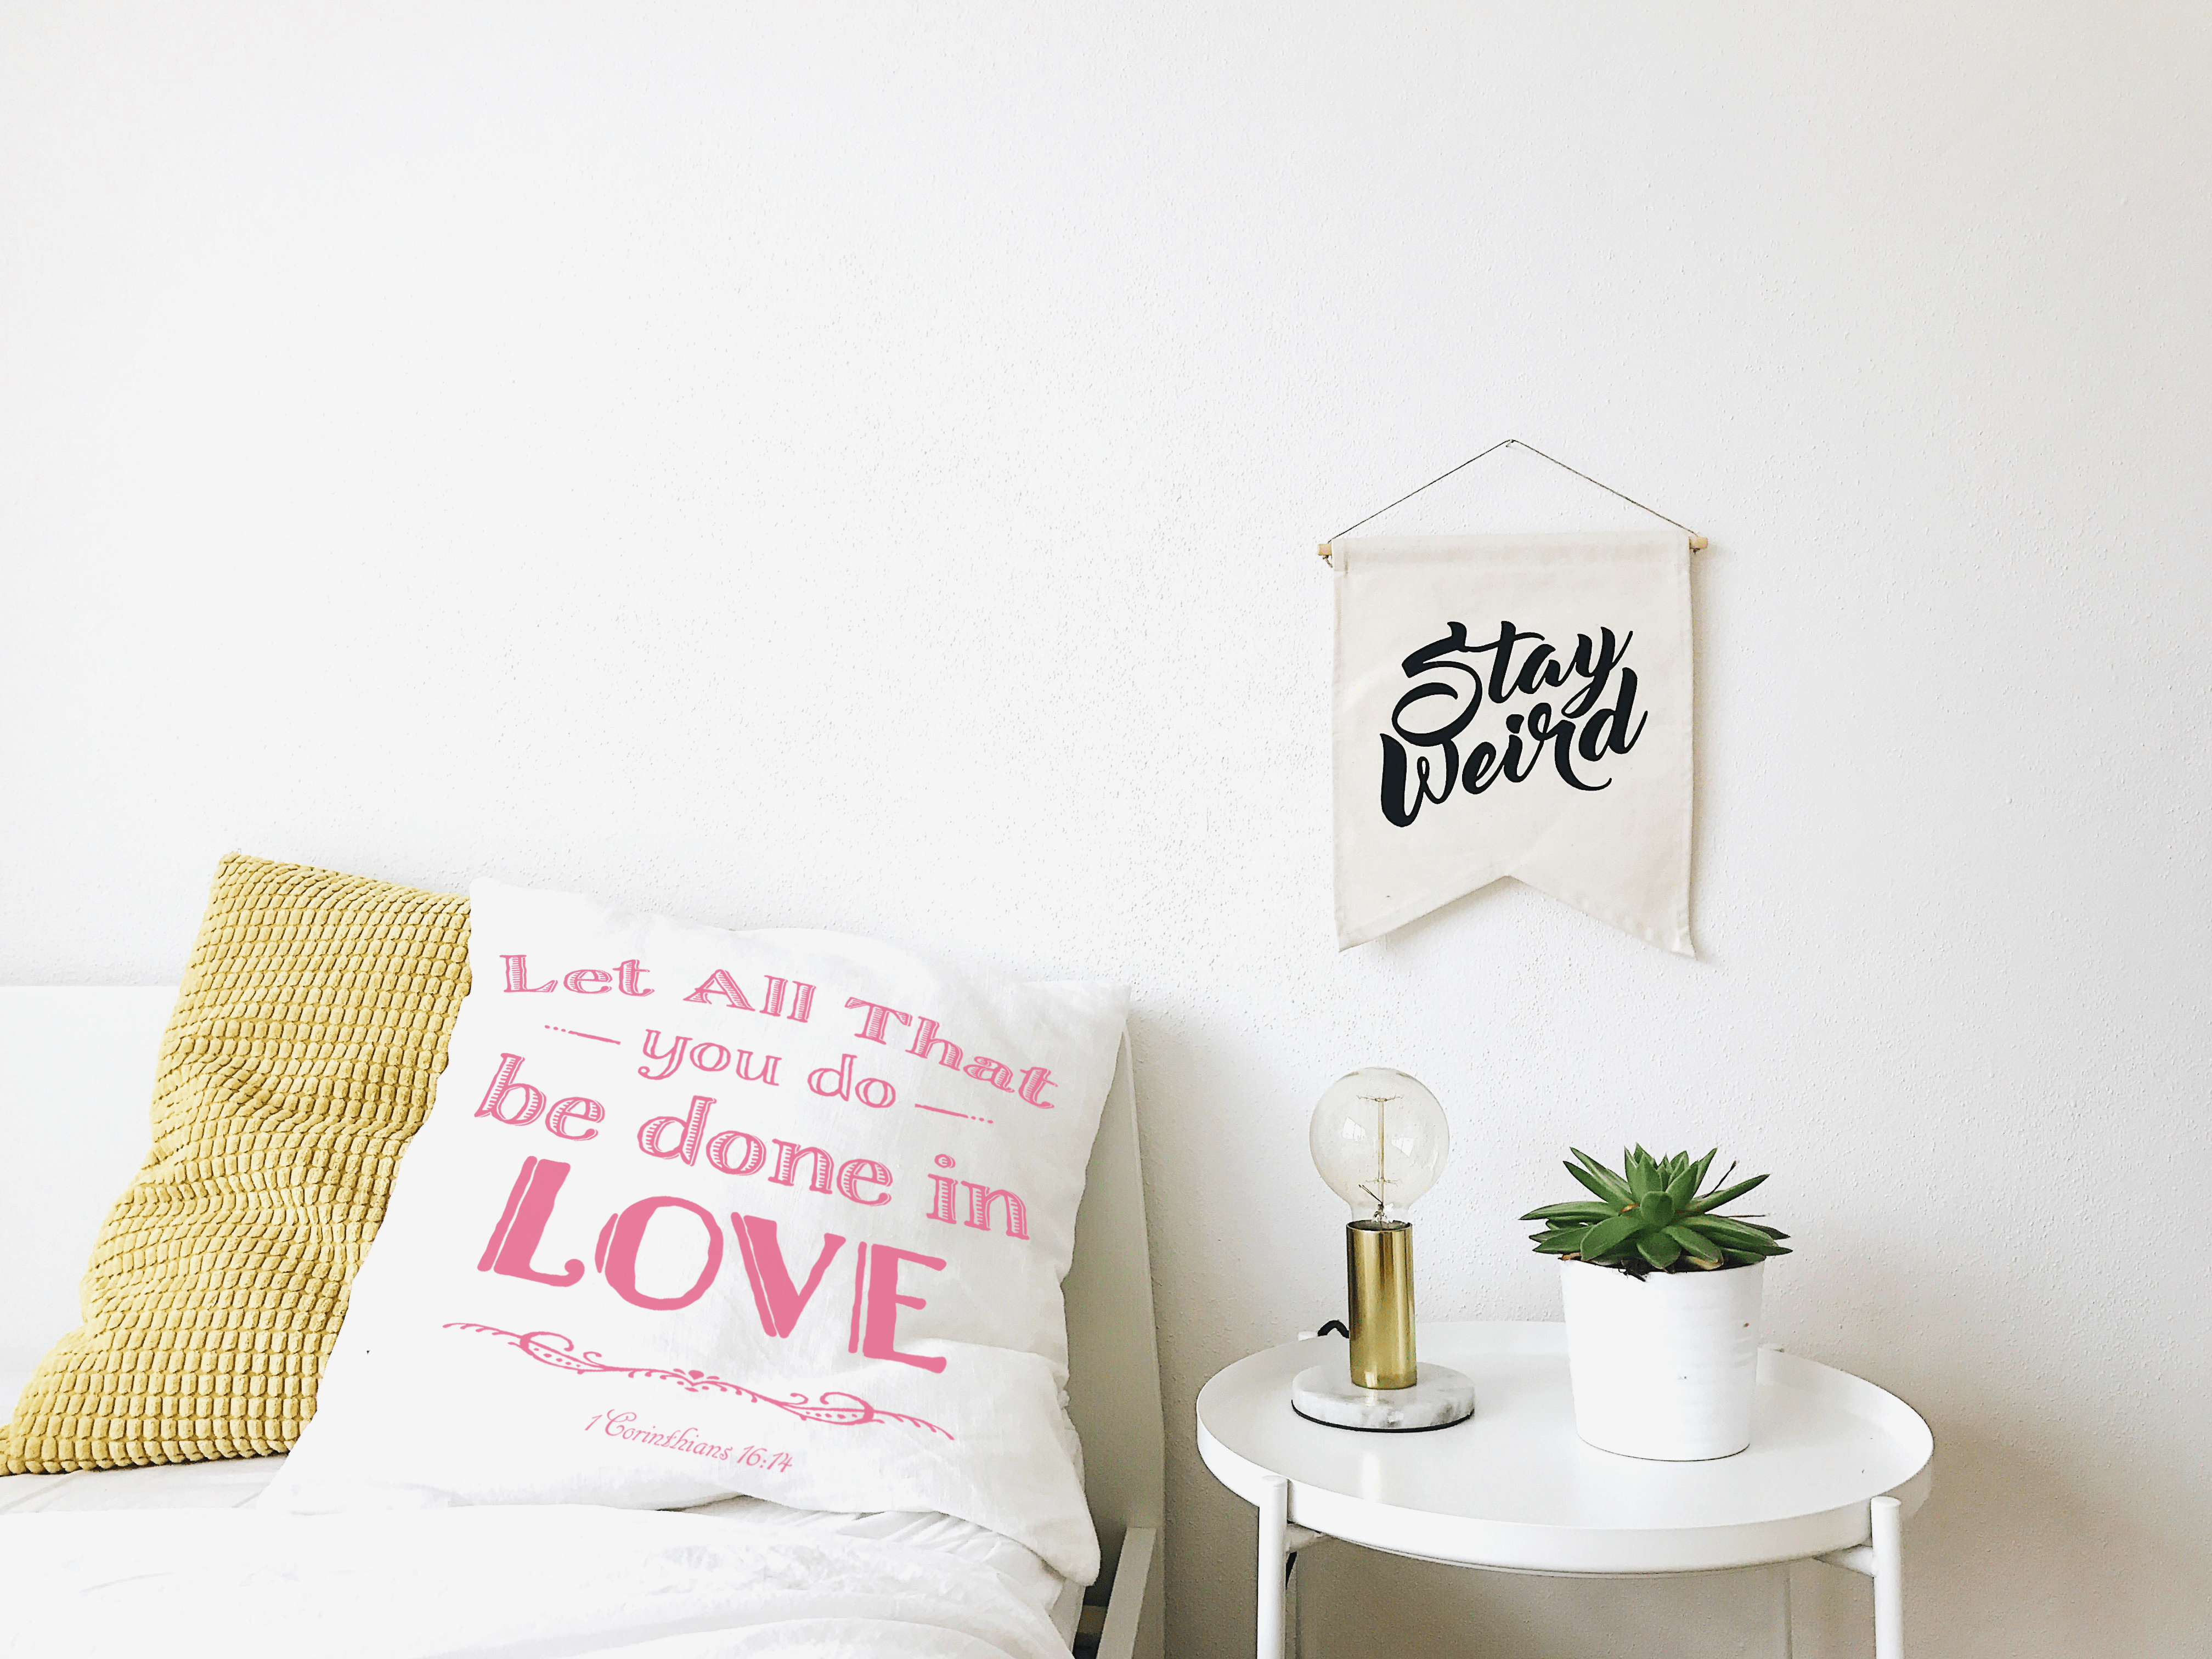 Let All That You Do Be Done In Love Decorative Throw Pillow Cushion - Pink Pillow A Moment Of Now Women’s Boutique Clothing Online Lifestyle Store